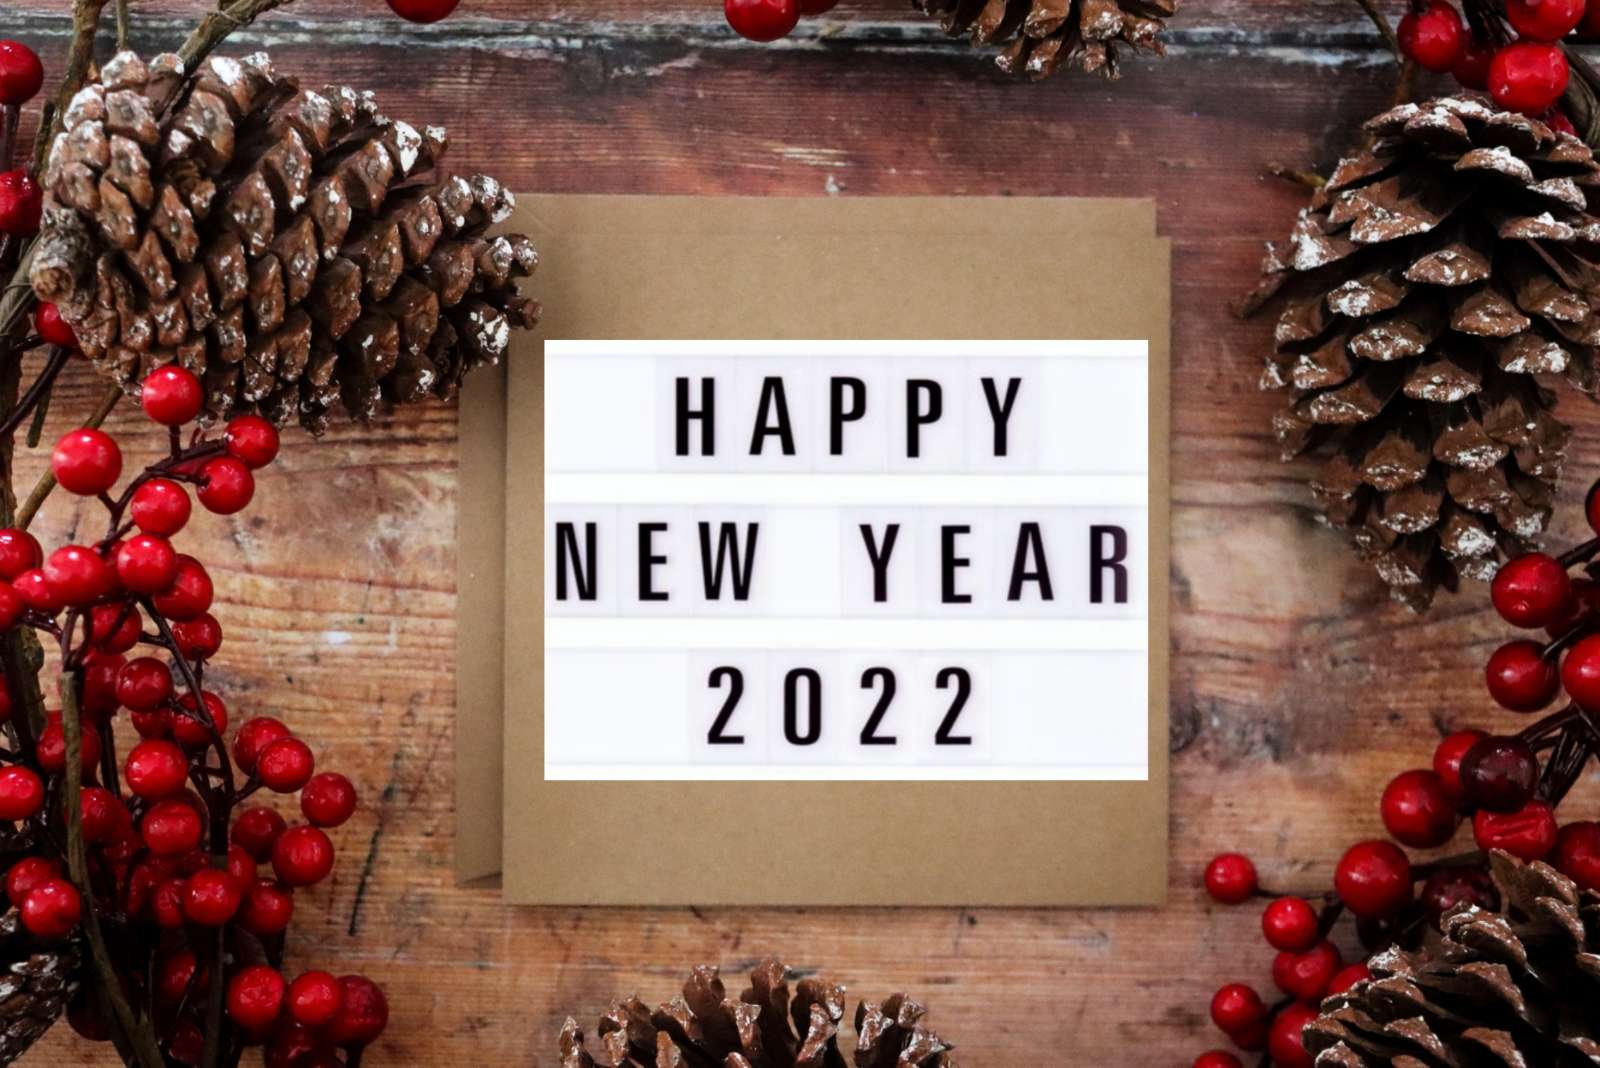 Happy New Year 2022 Background Images, HD Pictures and Wallpaper For Free  Download | Pngtree